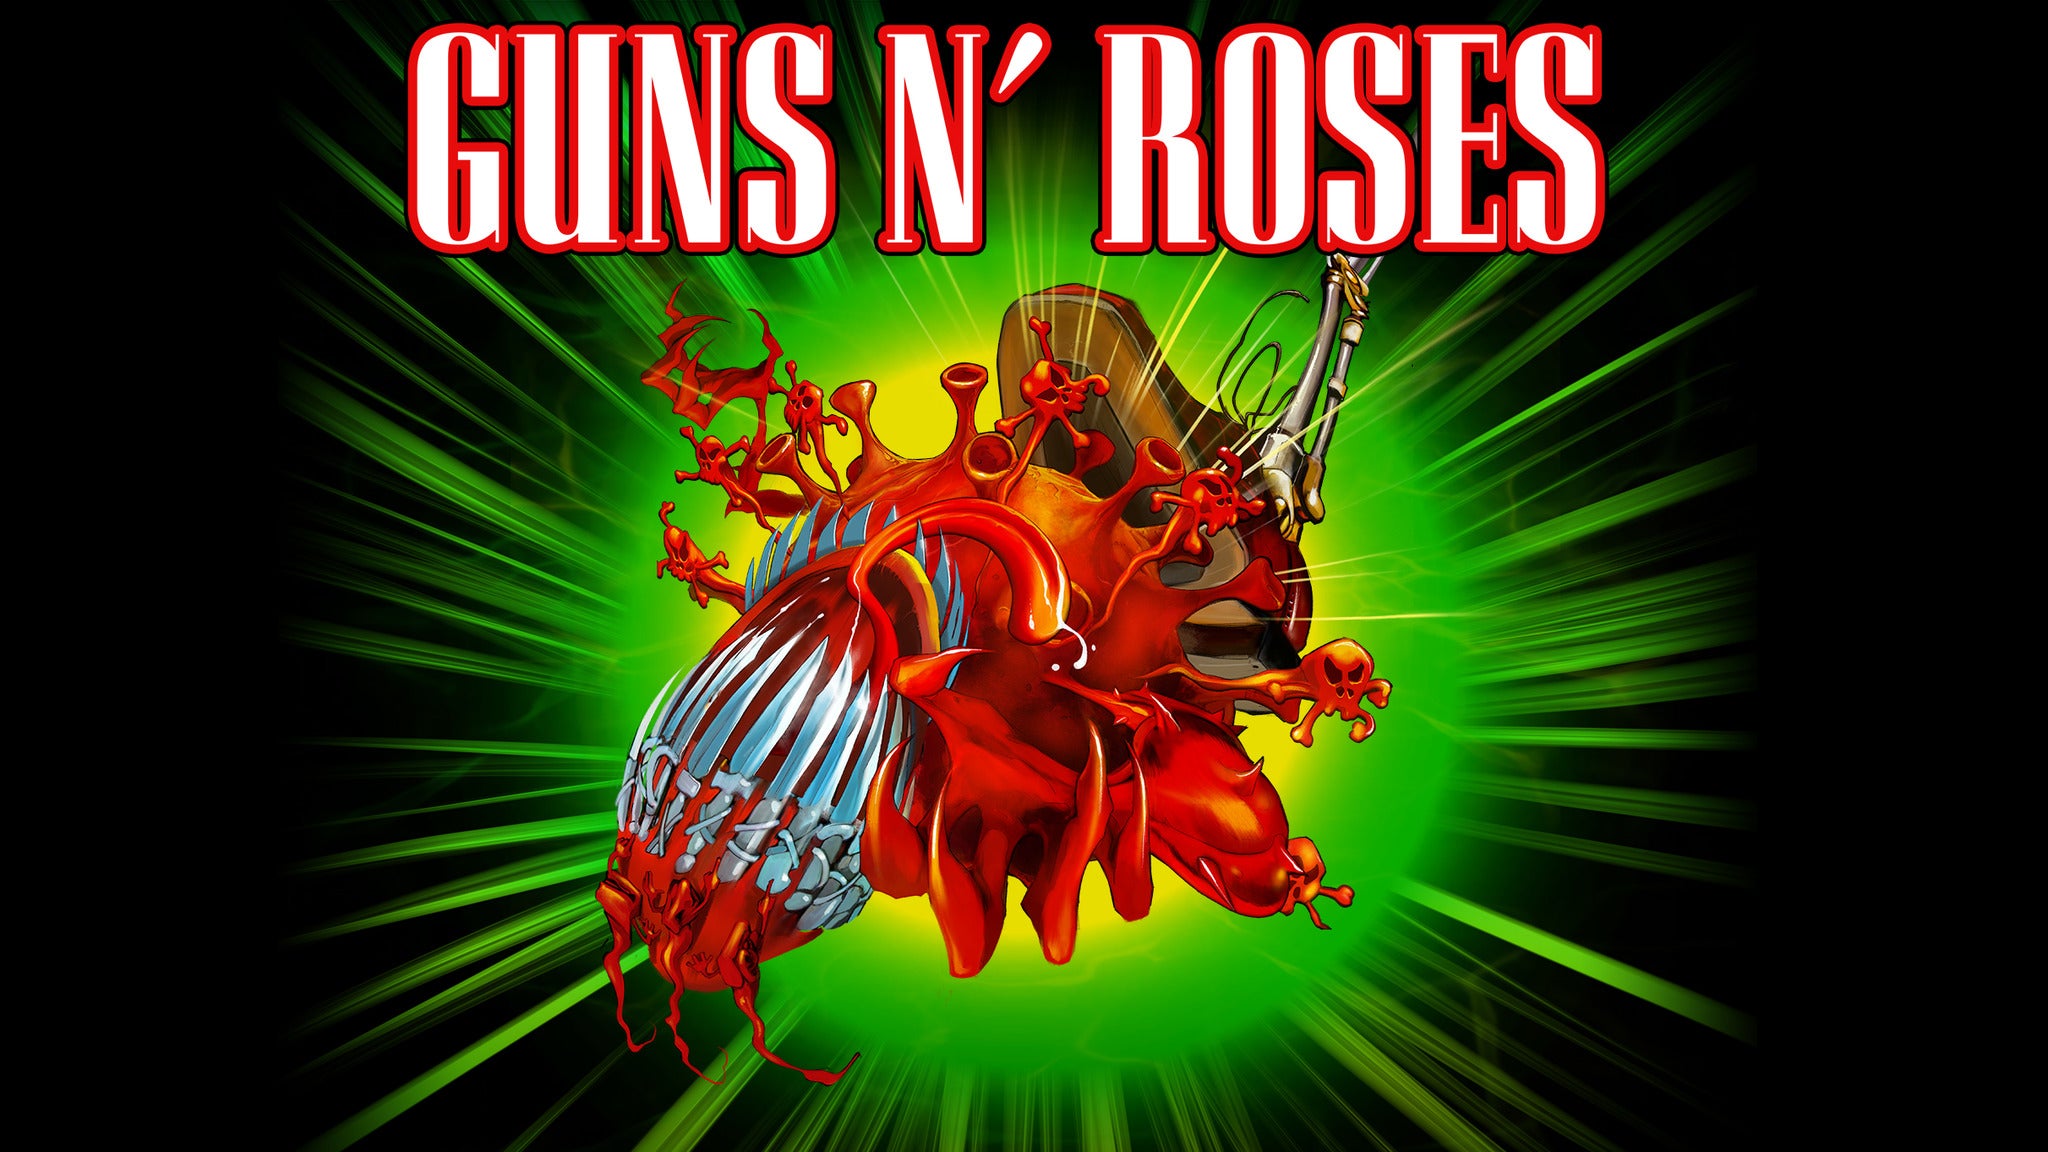 Guns N' Roses 2021 Tour presale code for early tickets in Baltimore